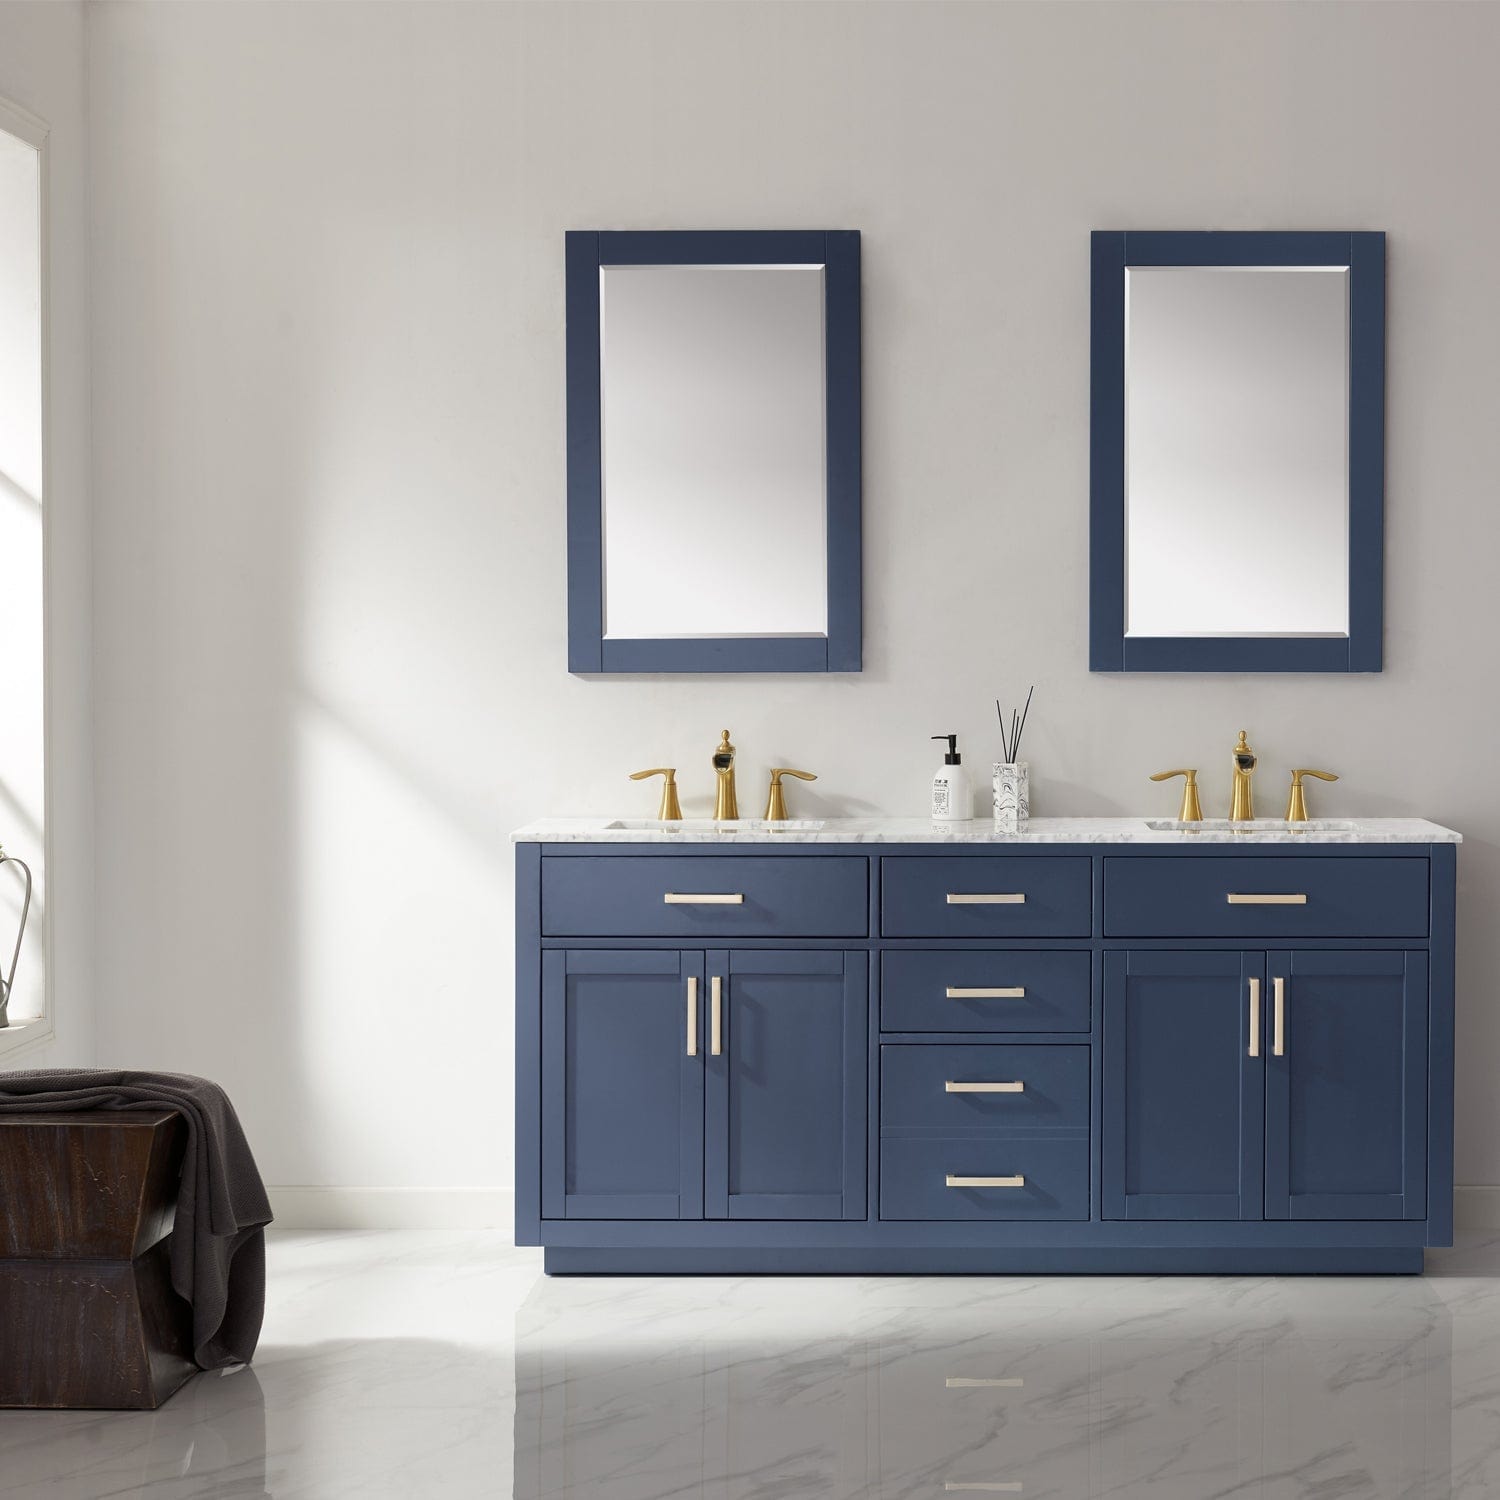 Altair Ivy 72" Double Bathroom Vanity Set in Royal Blue and Carrara White Marble Countertop with Mirror 531072-RB-CA - Molaix631112971294Vanity531072-RB-CA